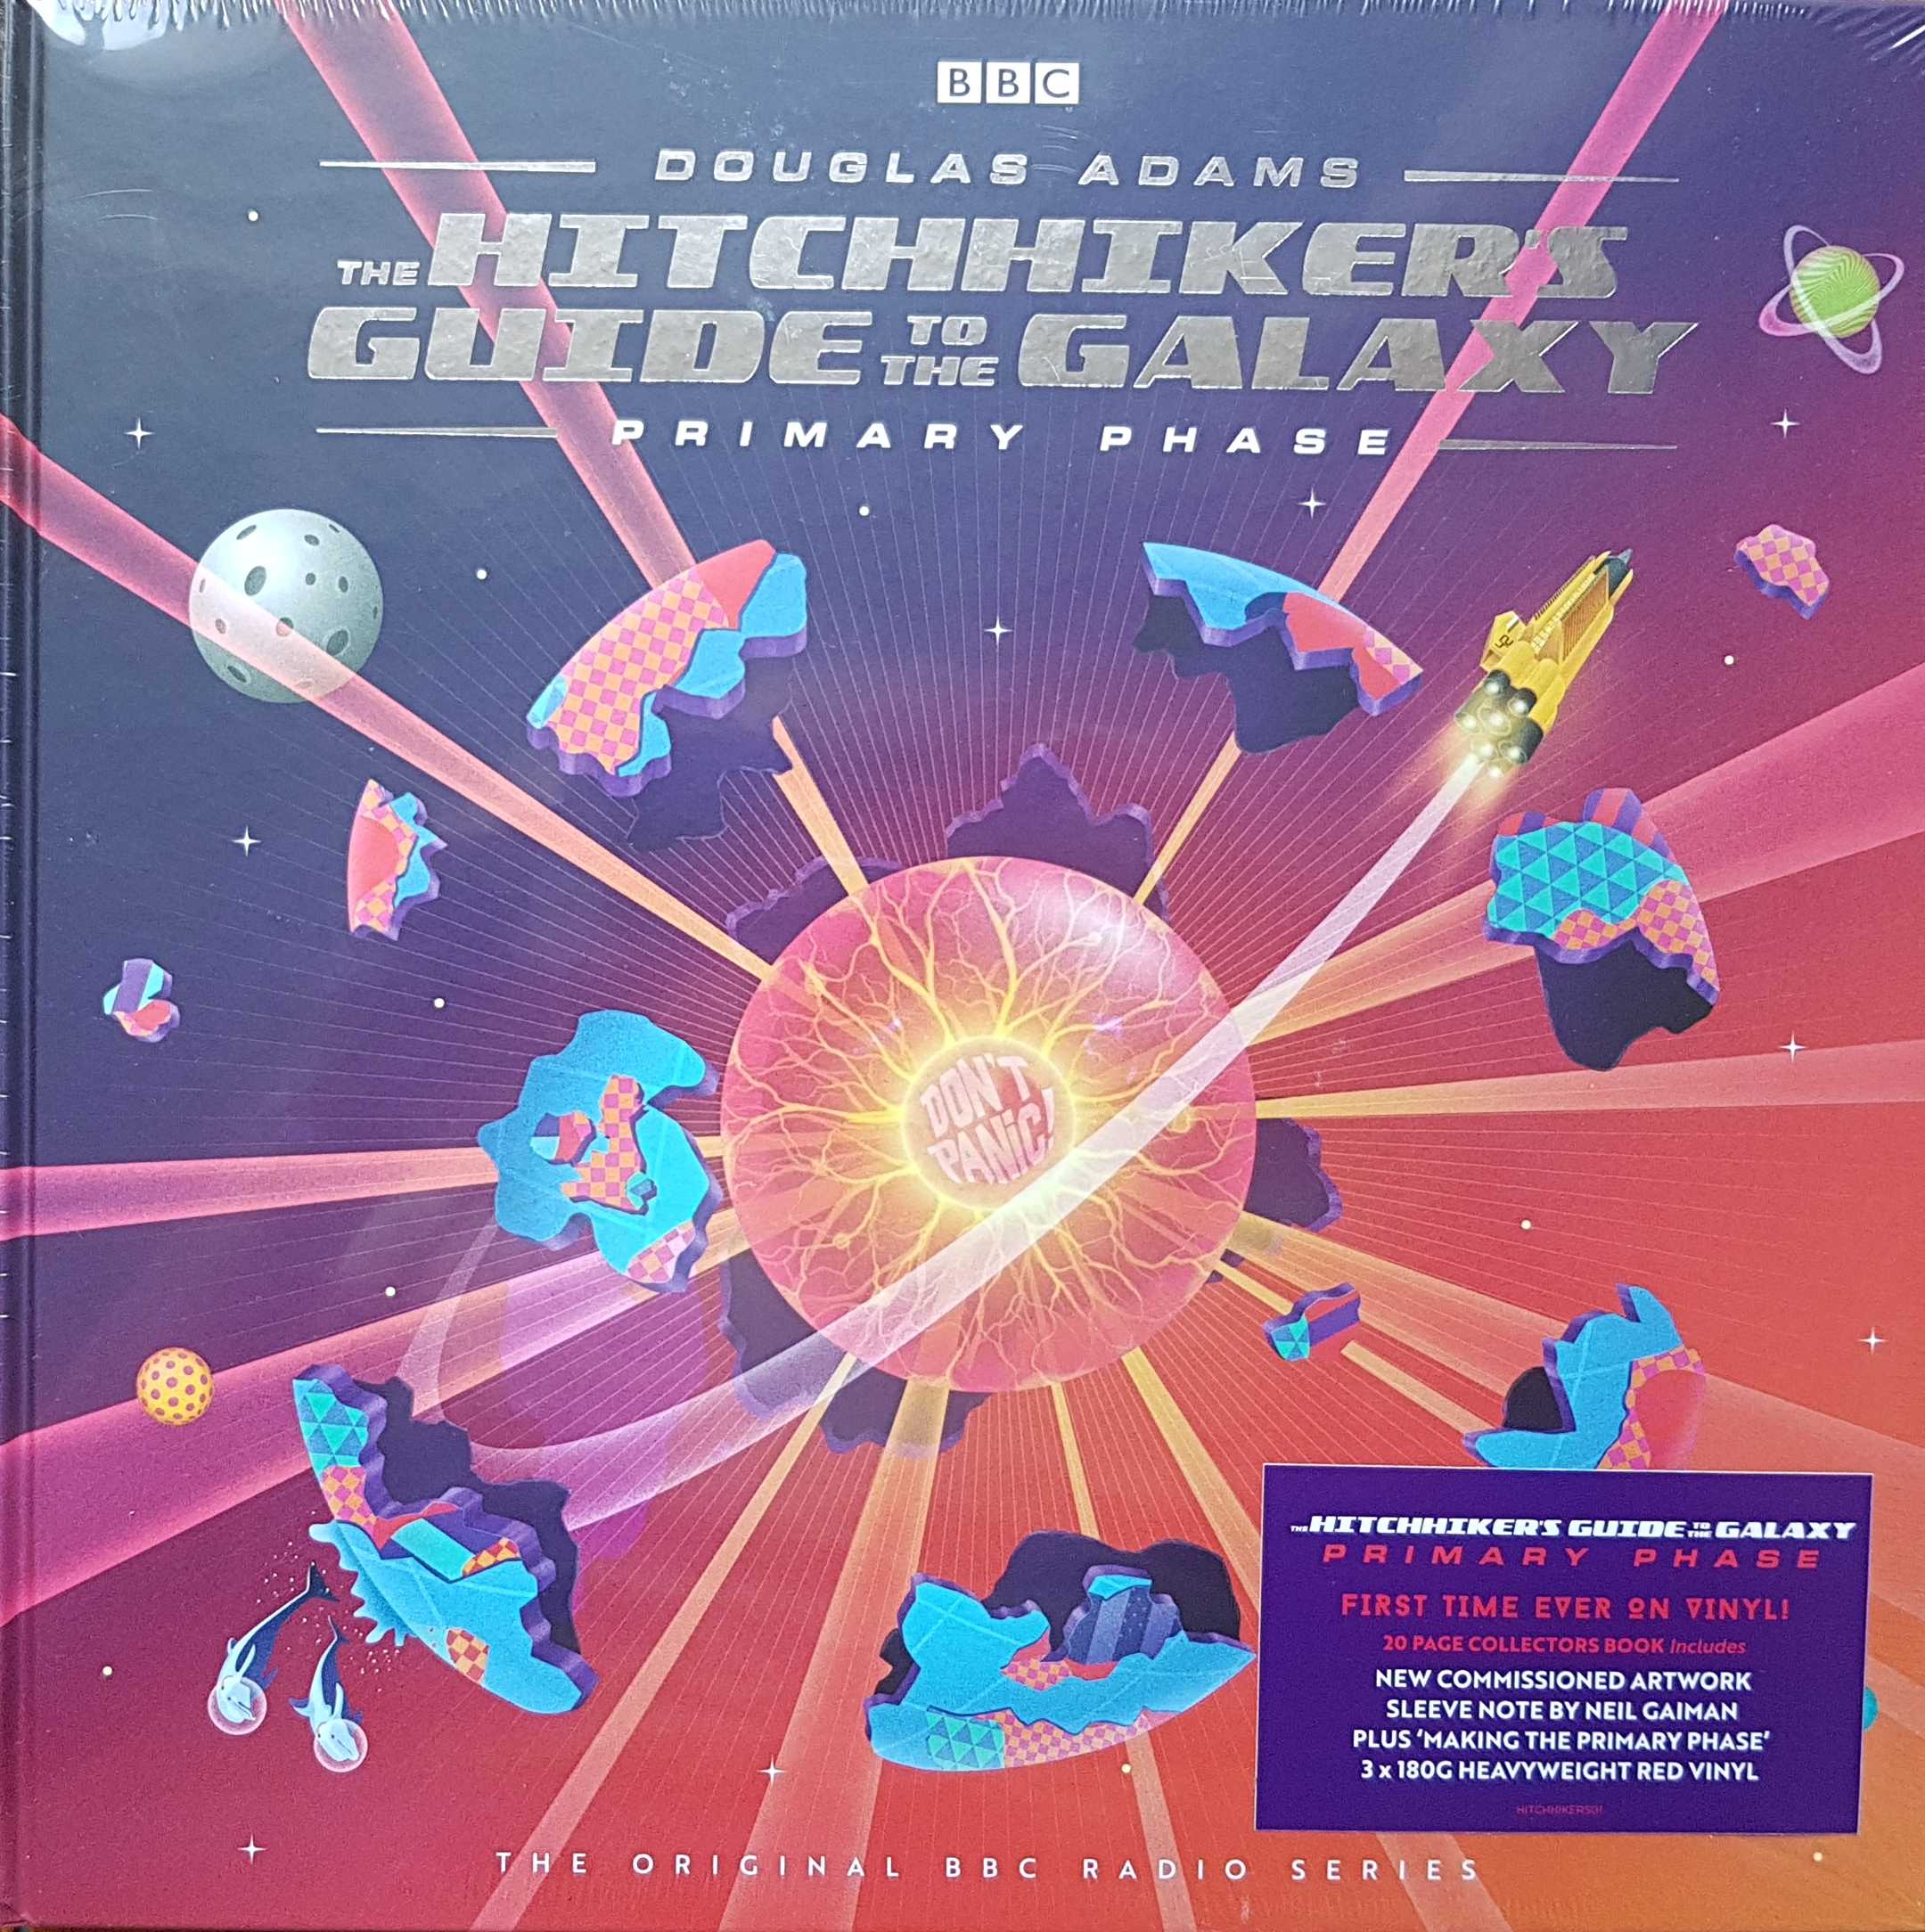 Picture of The hitch-hiker's guide to the galaxy - Primary phrase by artist Douglas Adams from the BBC albums - Records and Tapes library